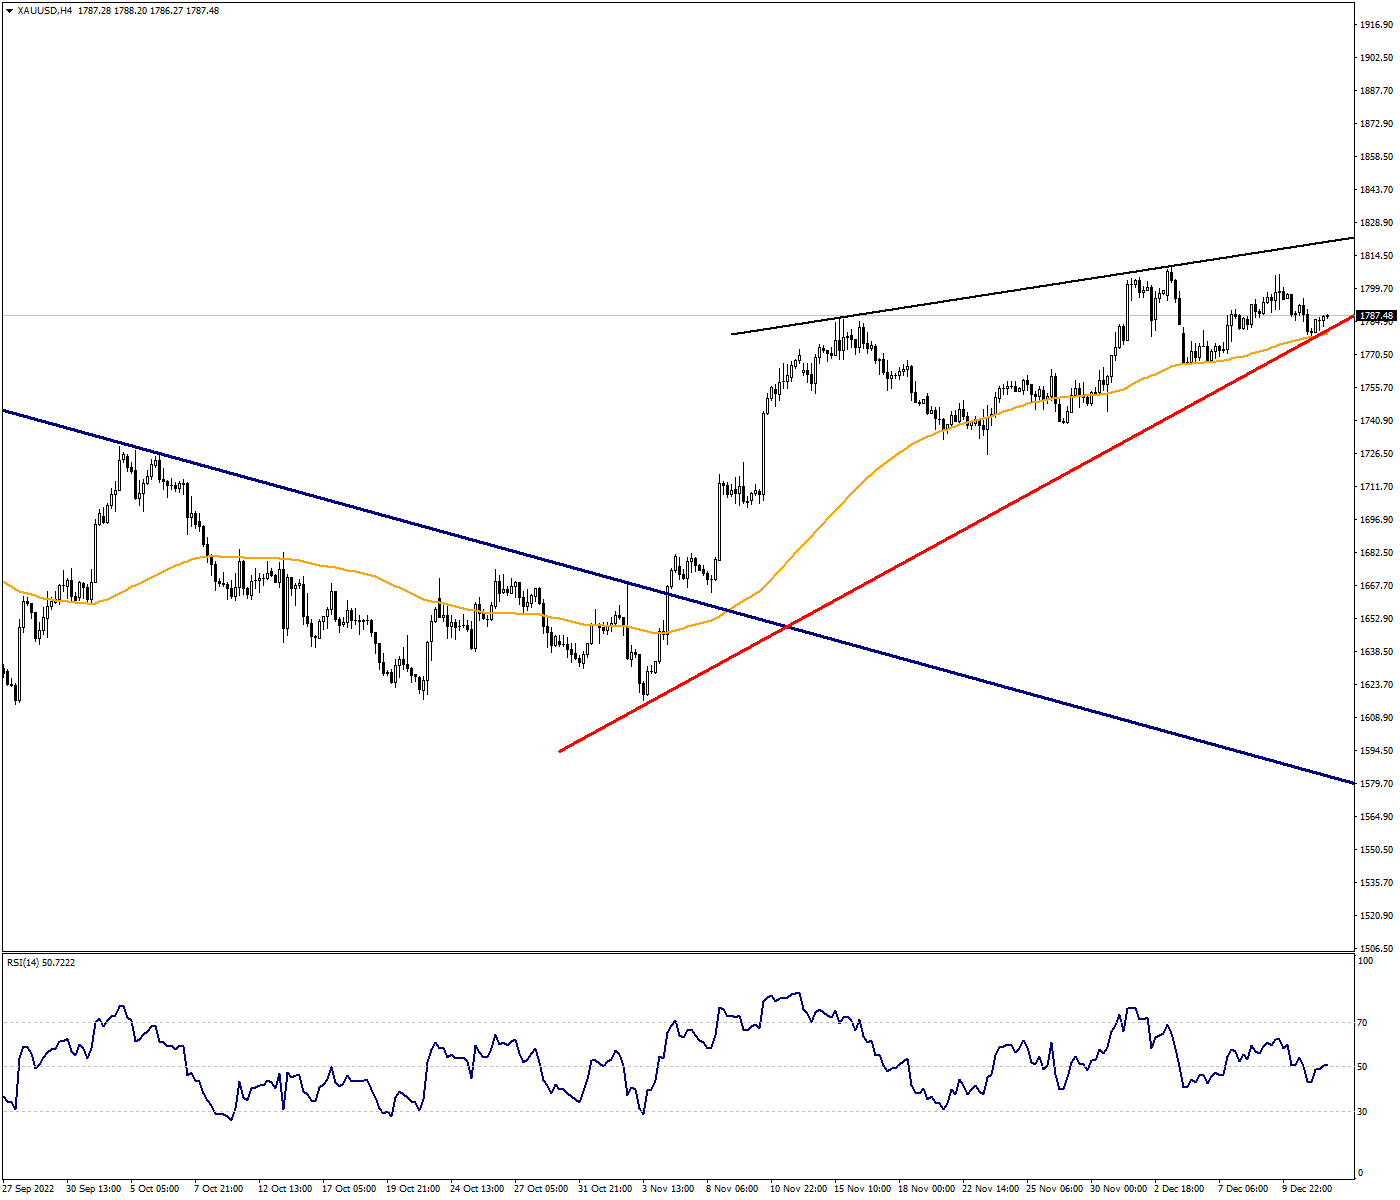 Medium Term Uptrend Potential is Maintained in Ounce Gold